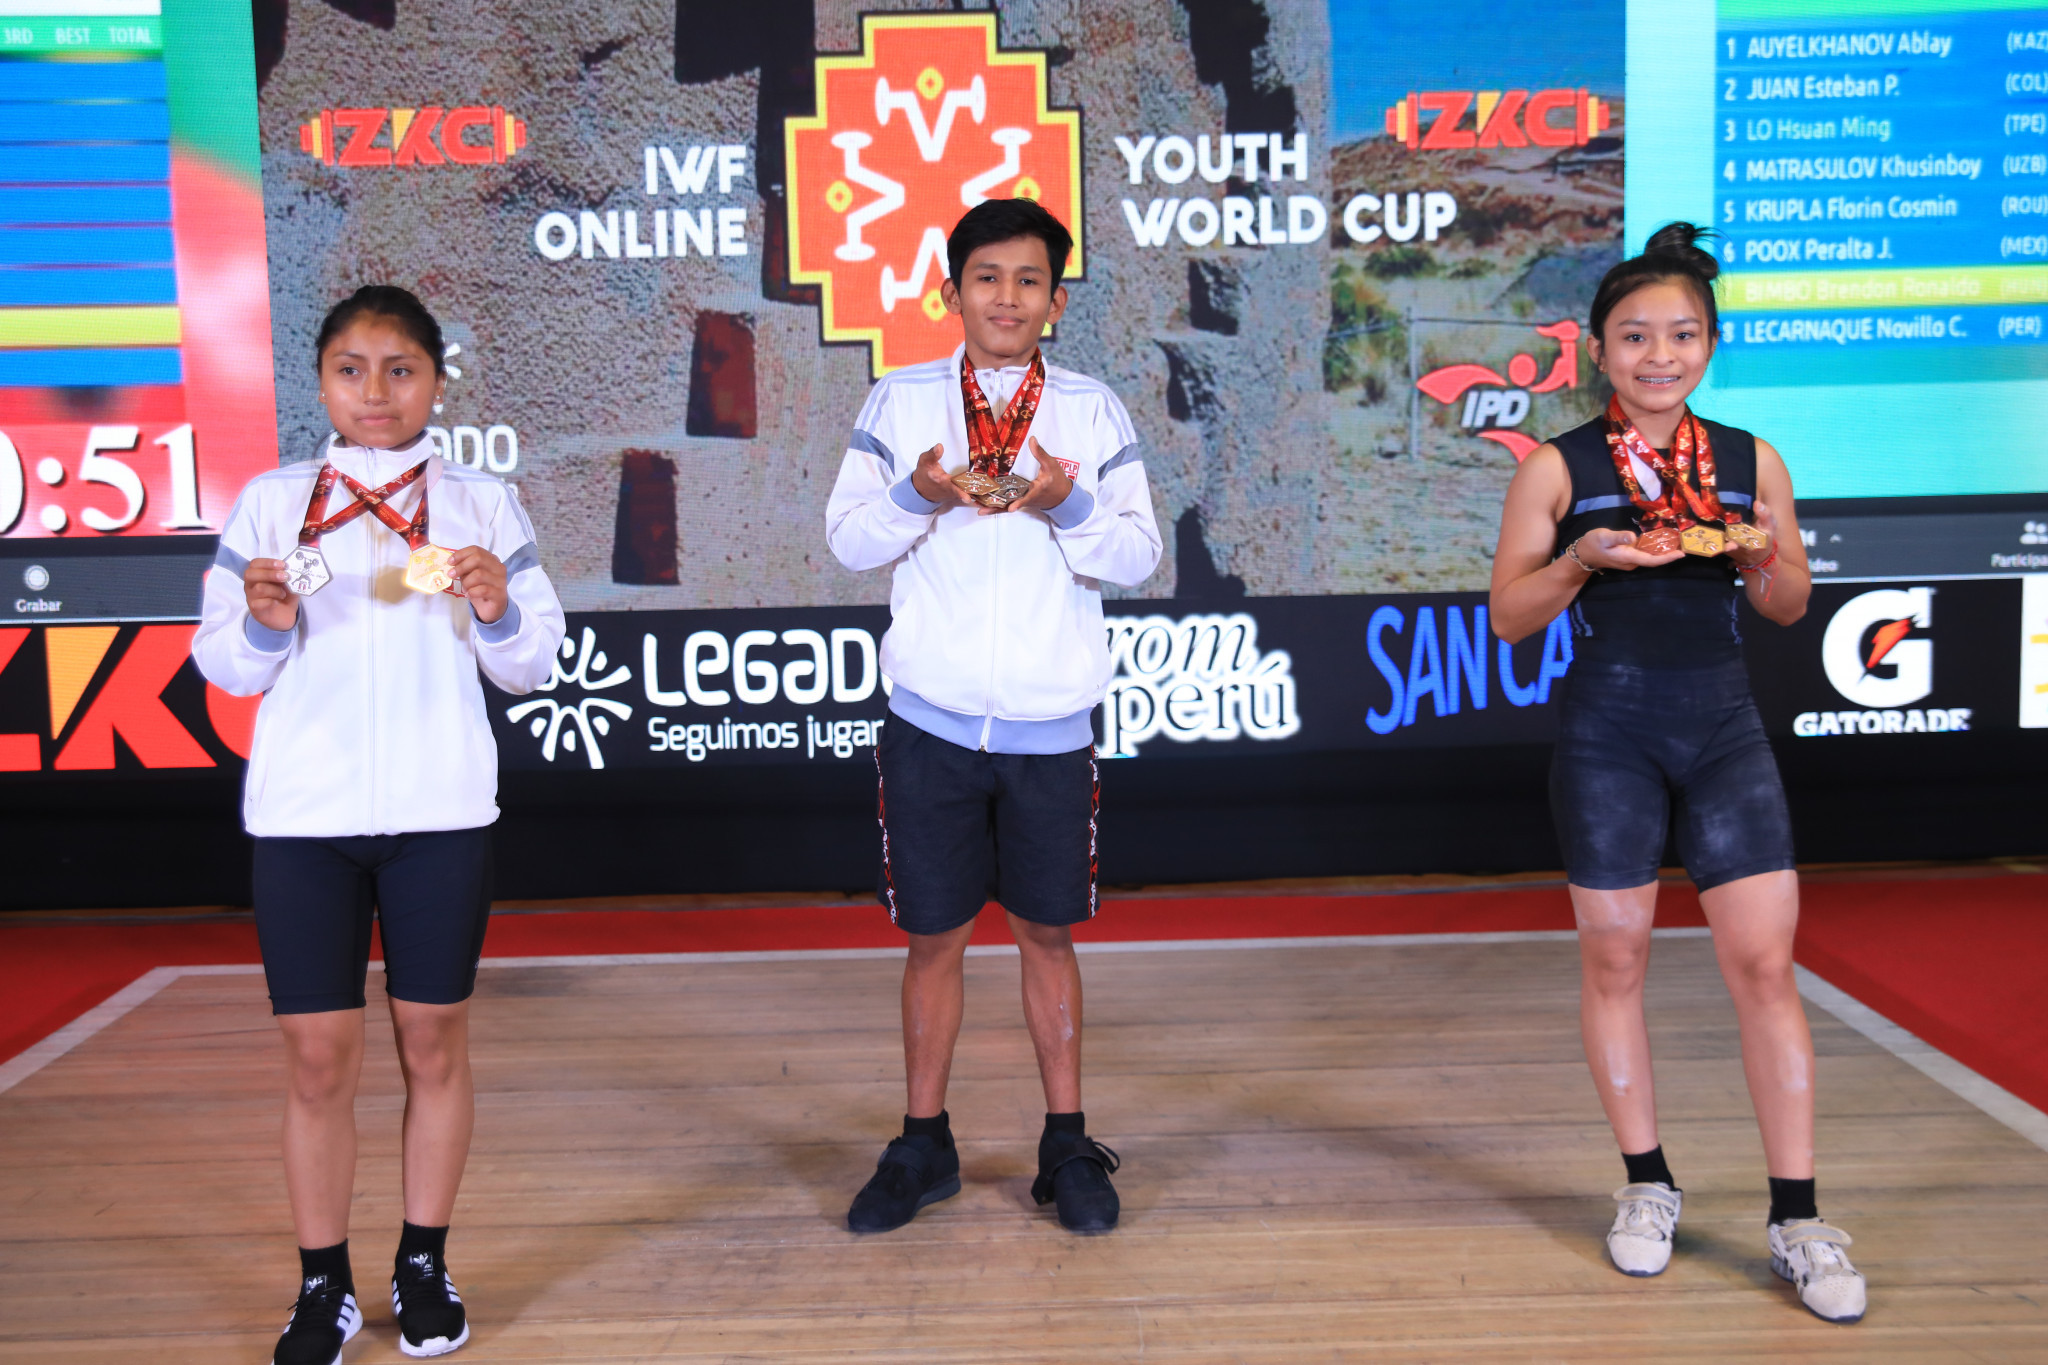 Virtual organisers Peru on top on first day of IWF Online Youth World Cup